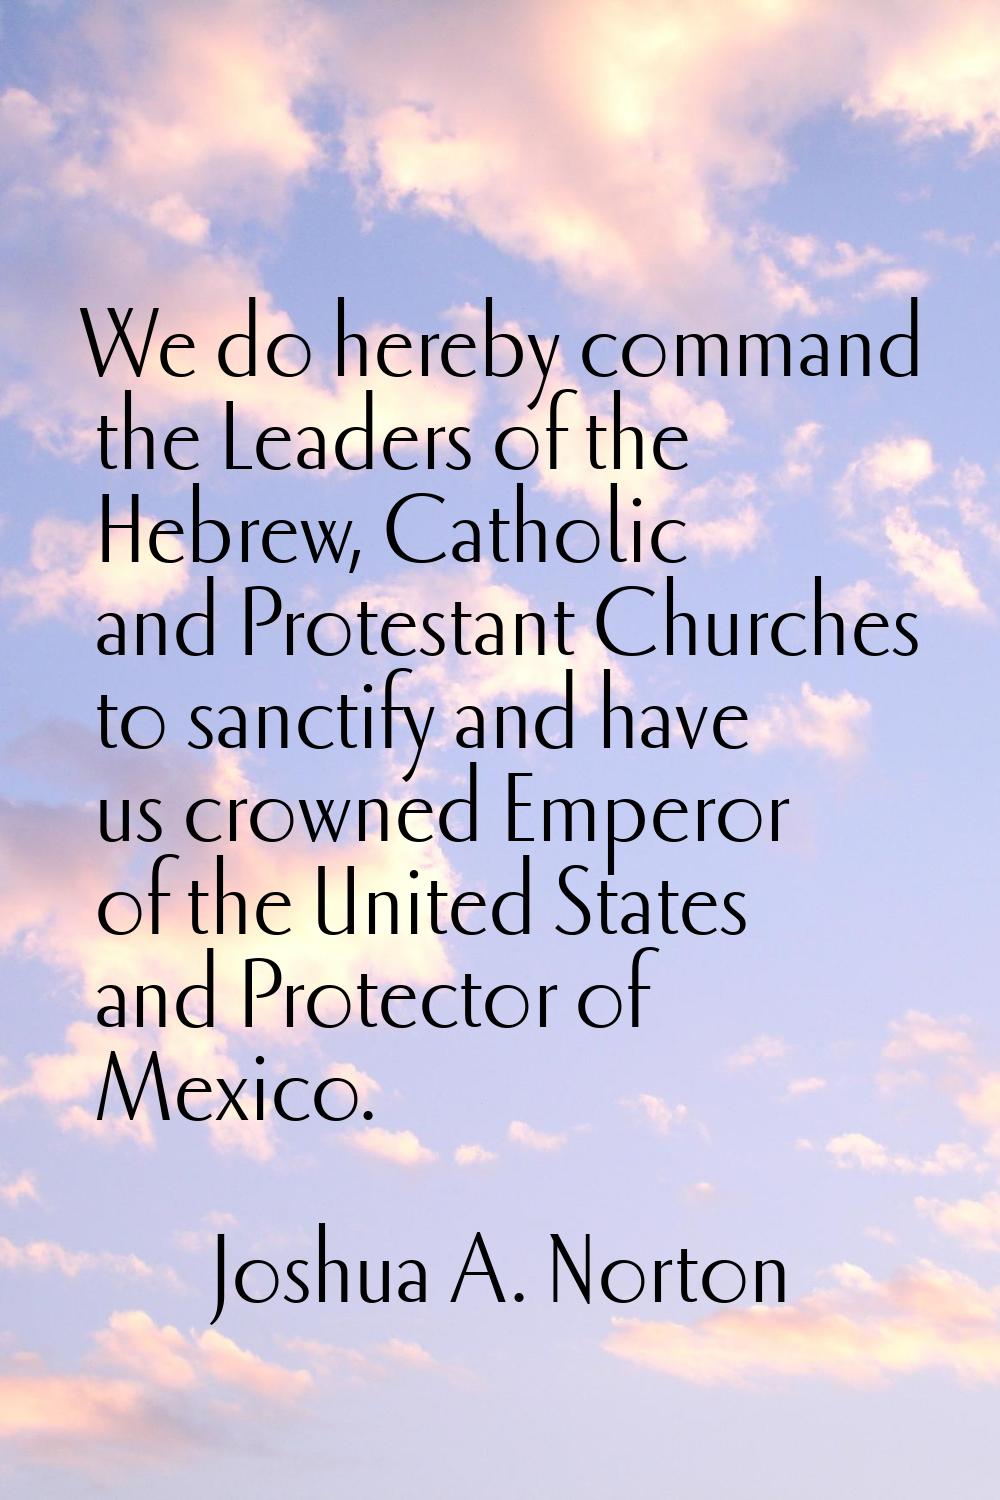 We do hereby command the Leaders of the Hebrew, Catholic and Protestant Churches to sanctify and ha